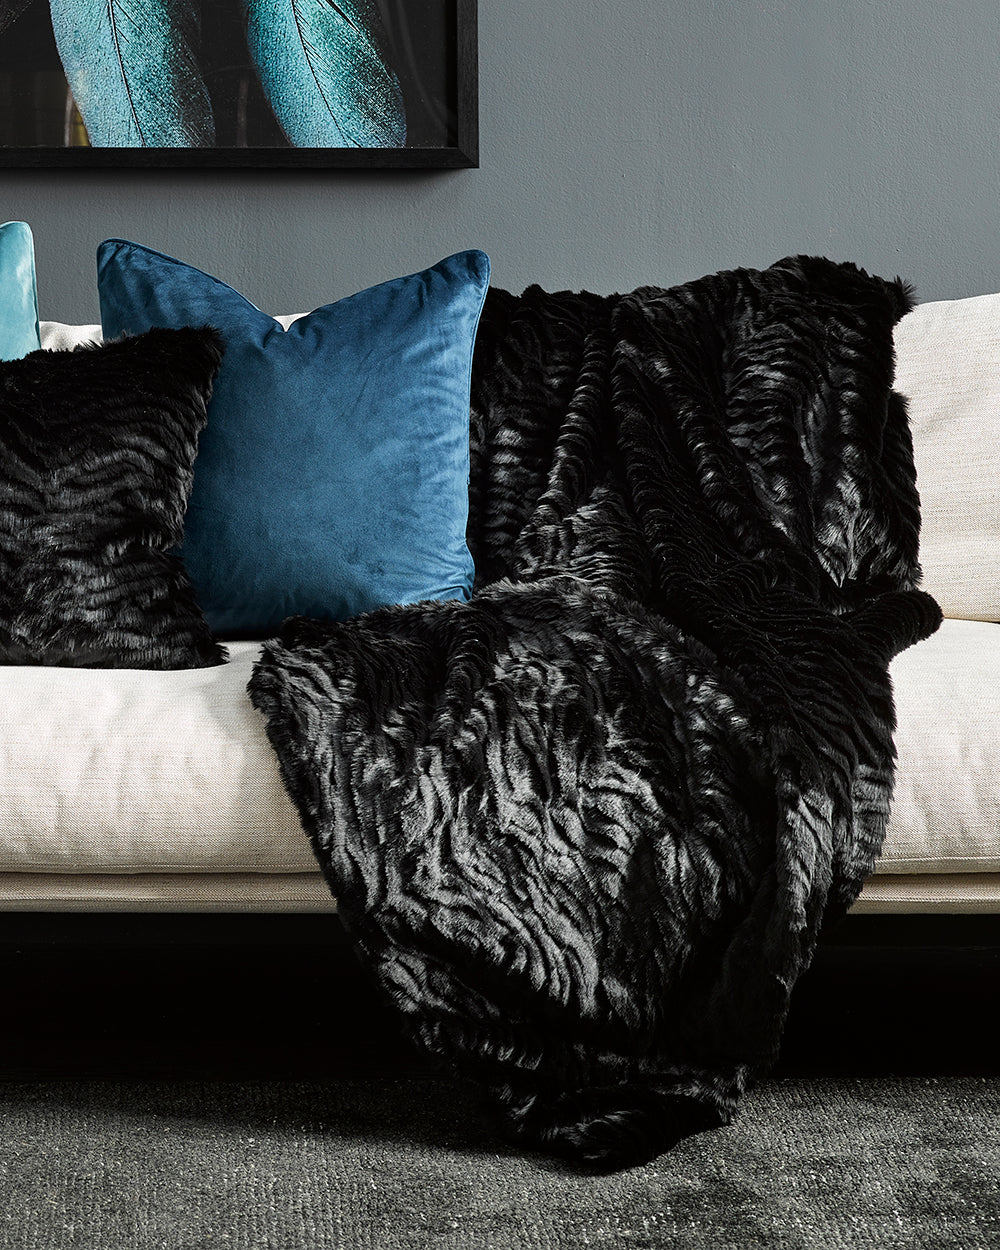 Heirloom Black Tiger Throw Rug Blanket in Faux Fur is available from Make Your House A Home Premium Stockist. Furniture Store Bendigo, Victoria. Australia Wide Delivery.